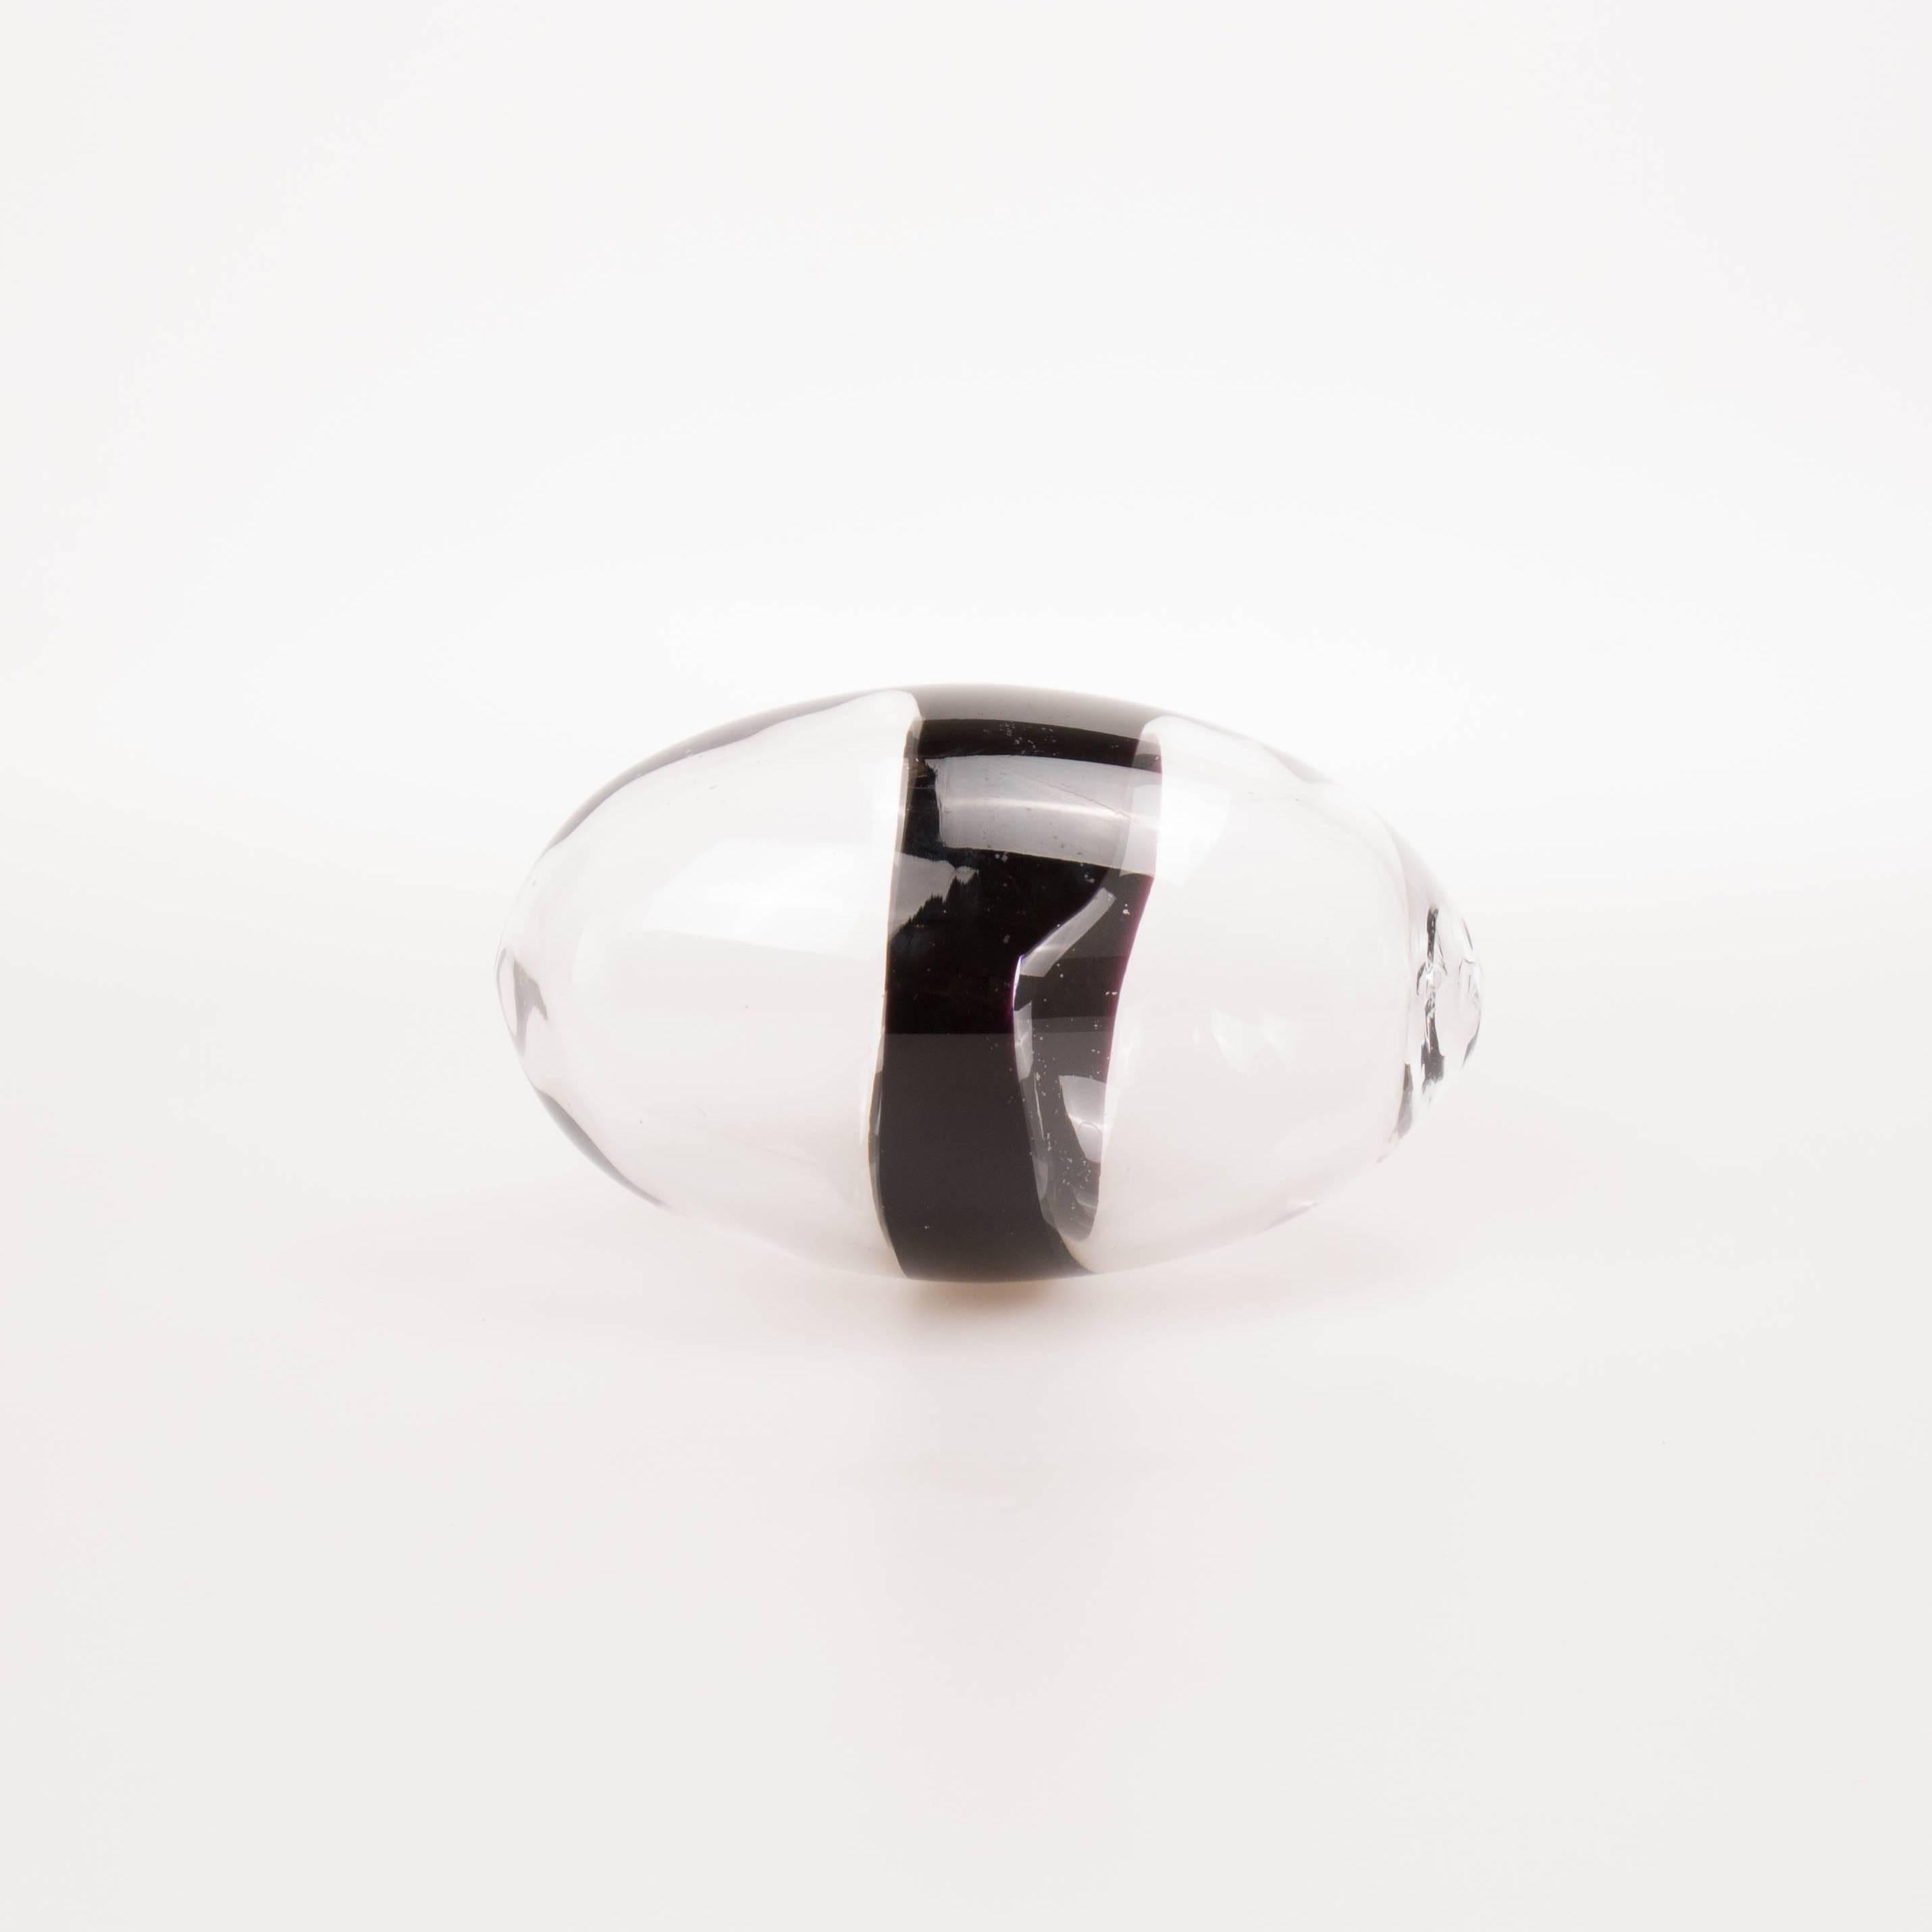 Clear glass egg form with black irregular horizontal band designed by? Ludovico Diaz de Santillana for Venini for Pierre Cardin. Italian, late 1960s.